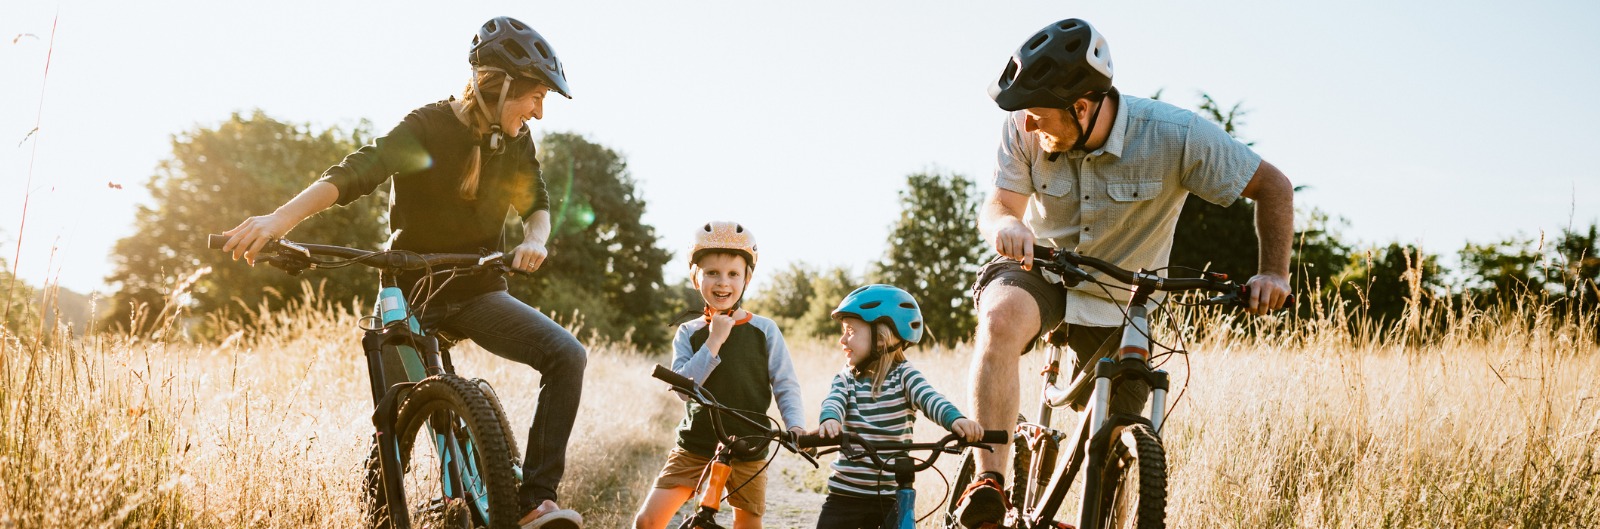 family-mountain-bike-riding-together-on-sunny-day-1600x529.jpg